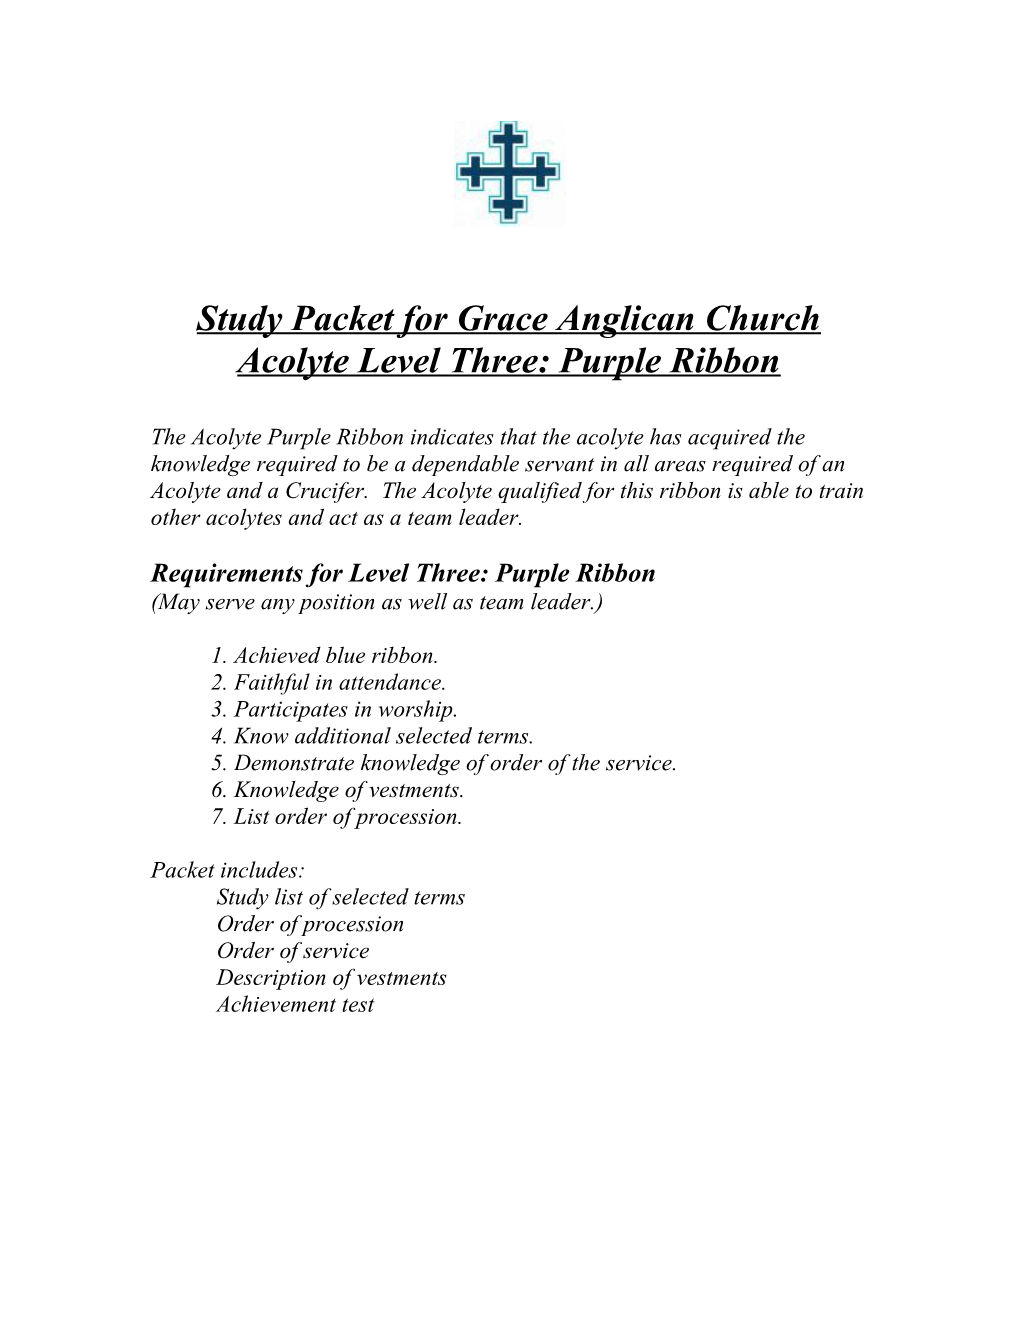 Study Packet for Grace Anglican Church